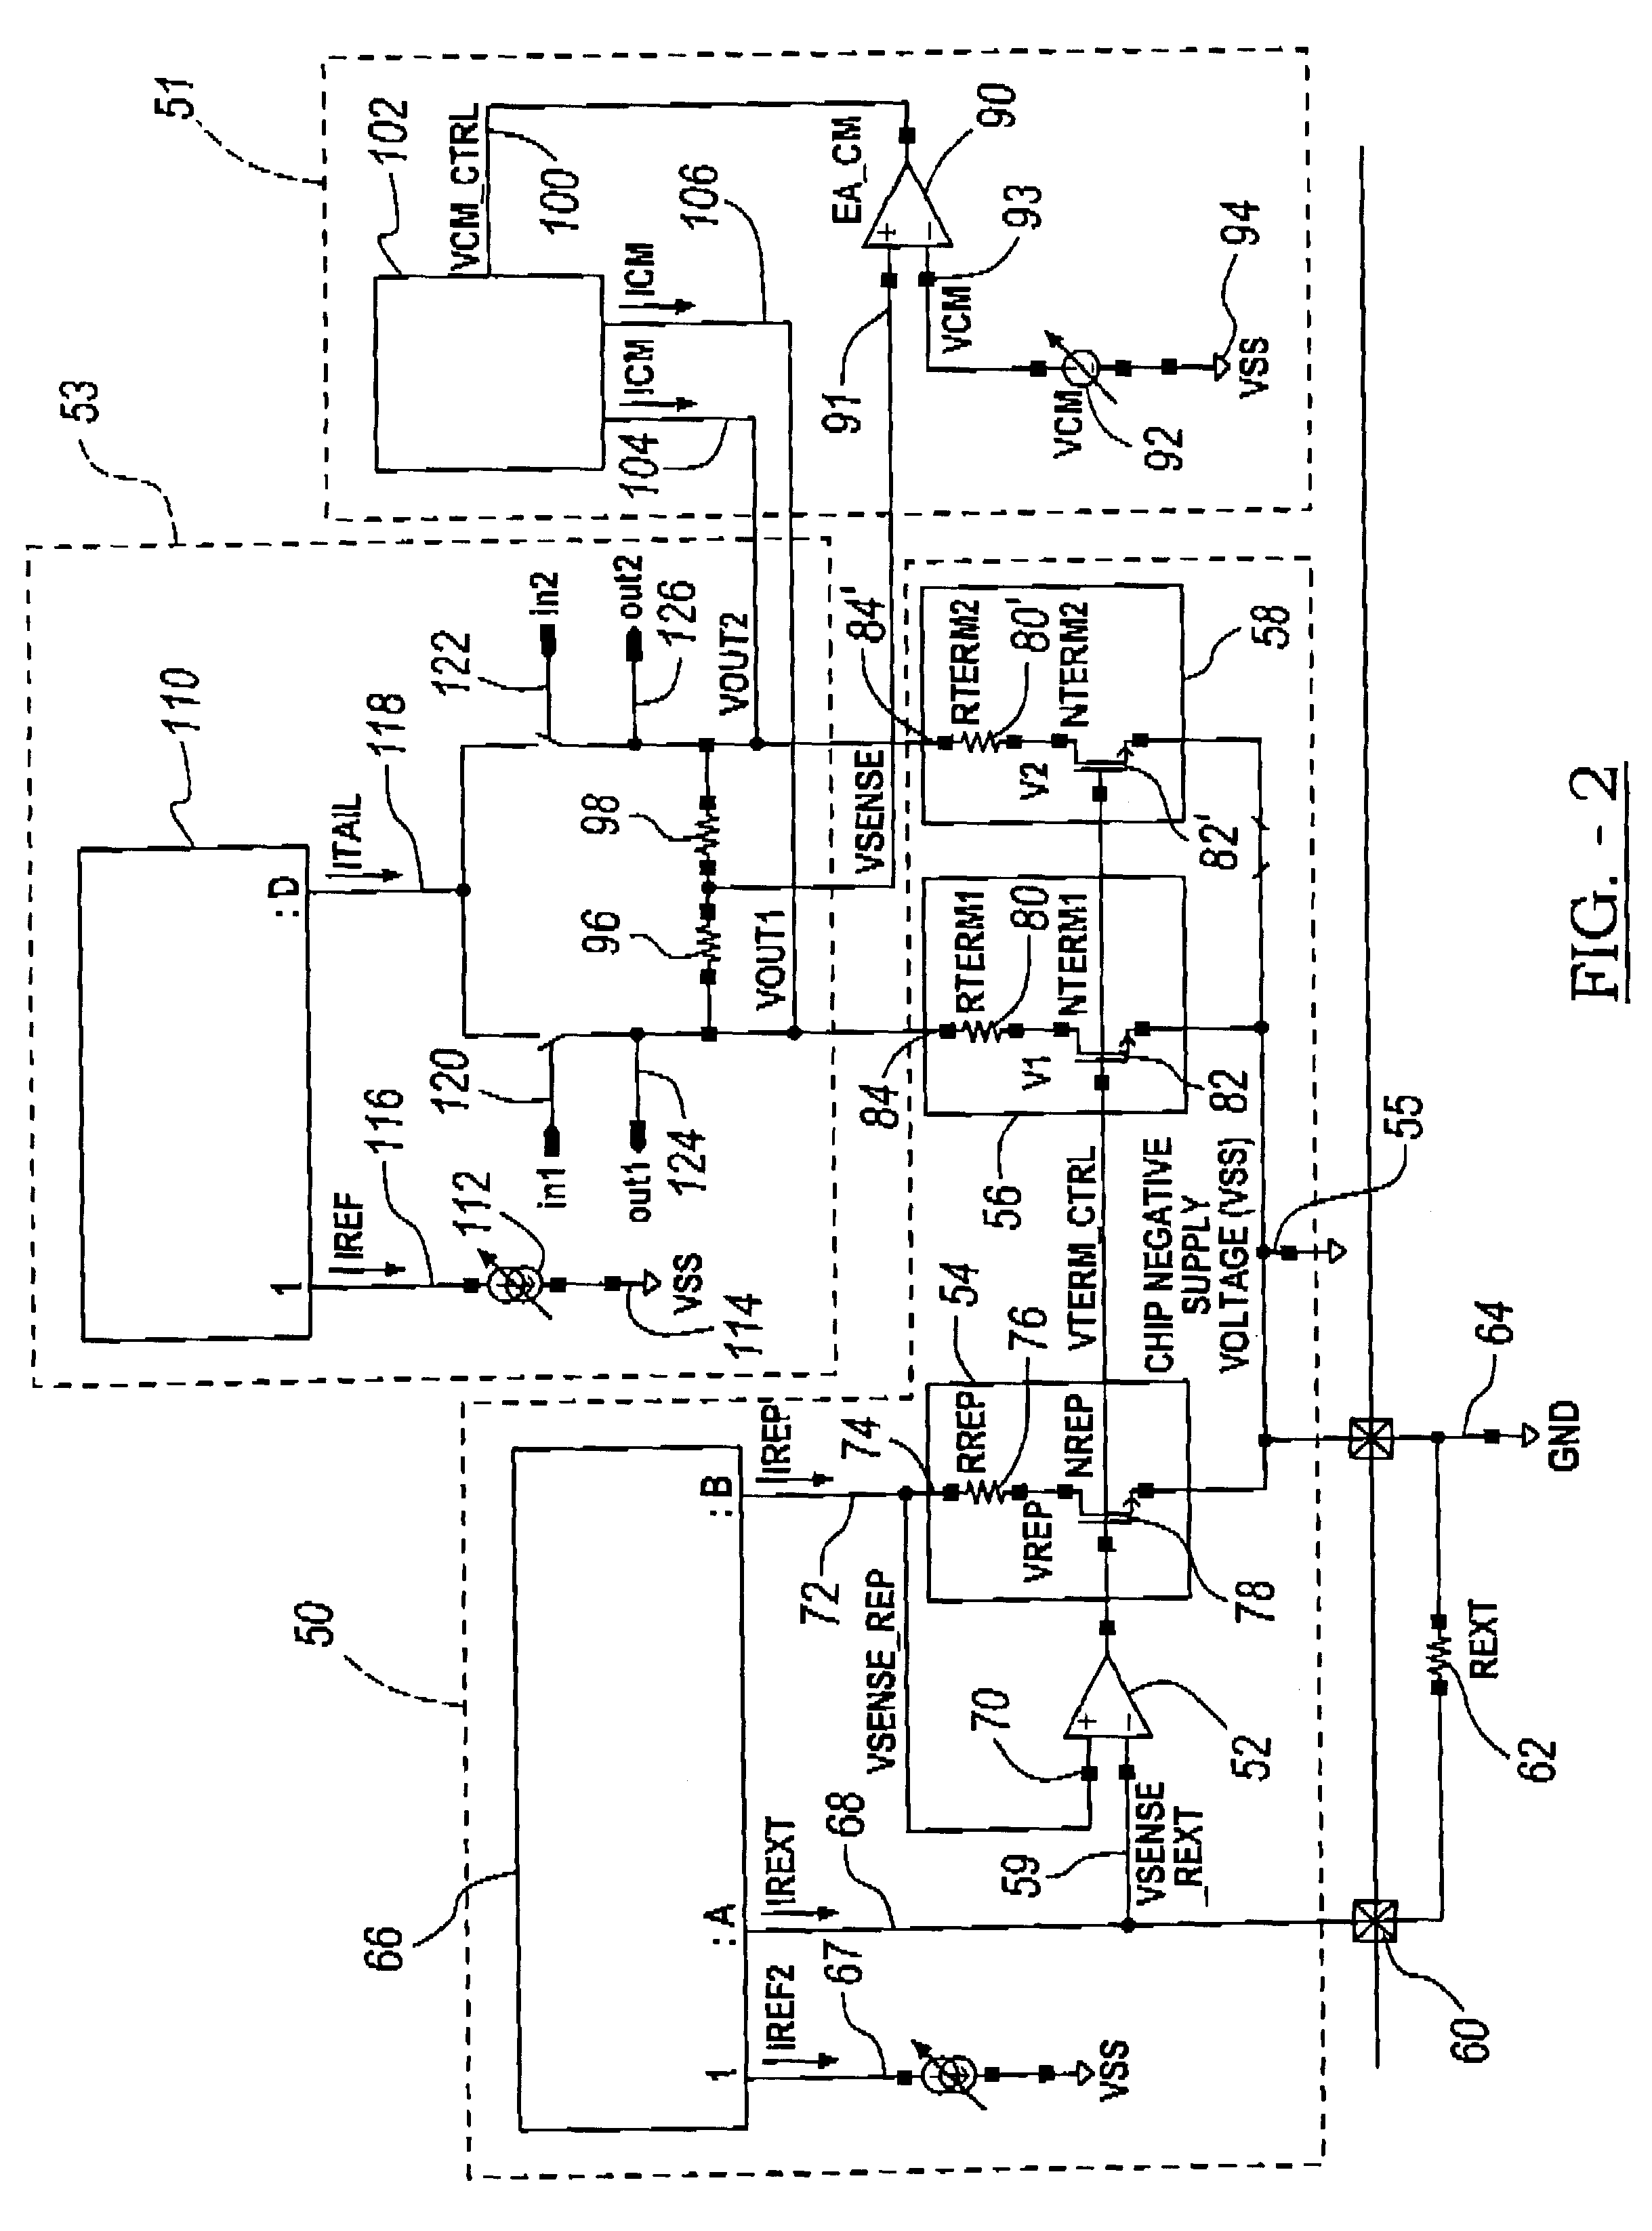 Output controlled line driver with programmable common mode control